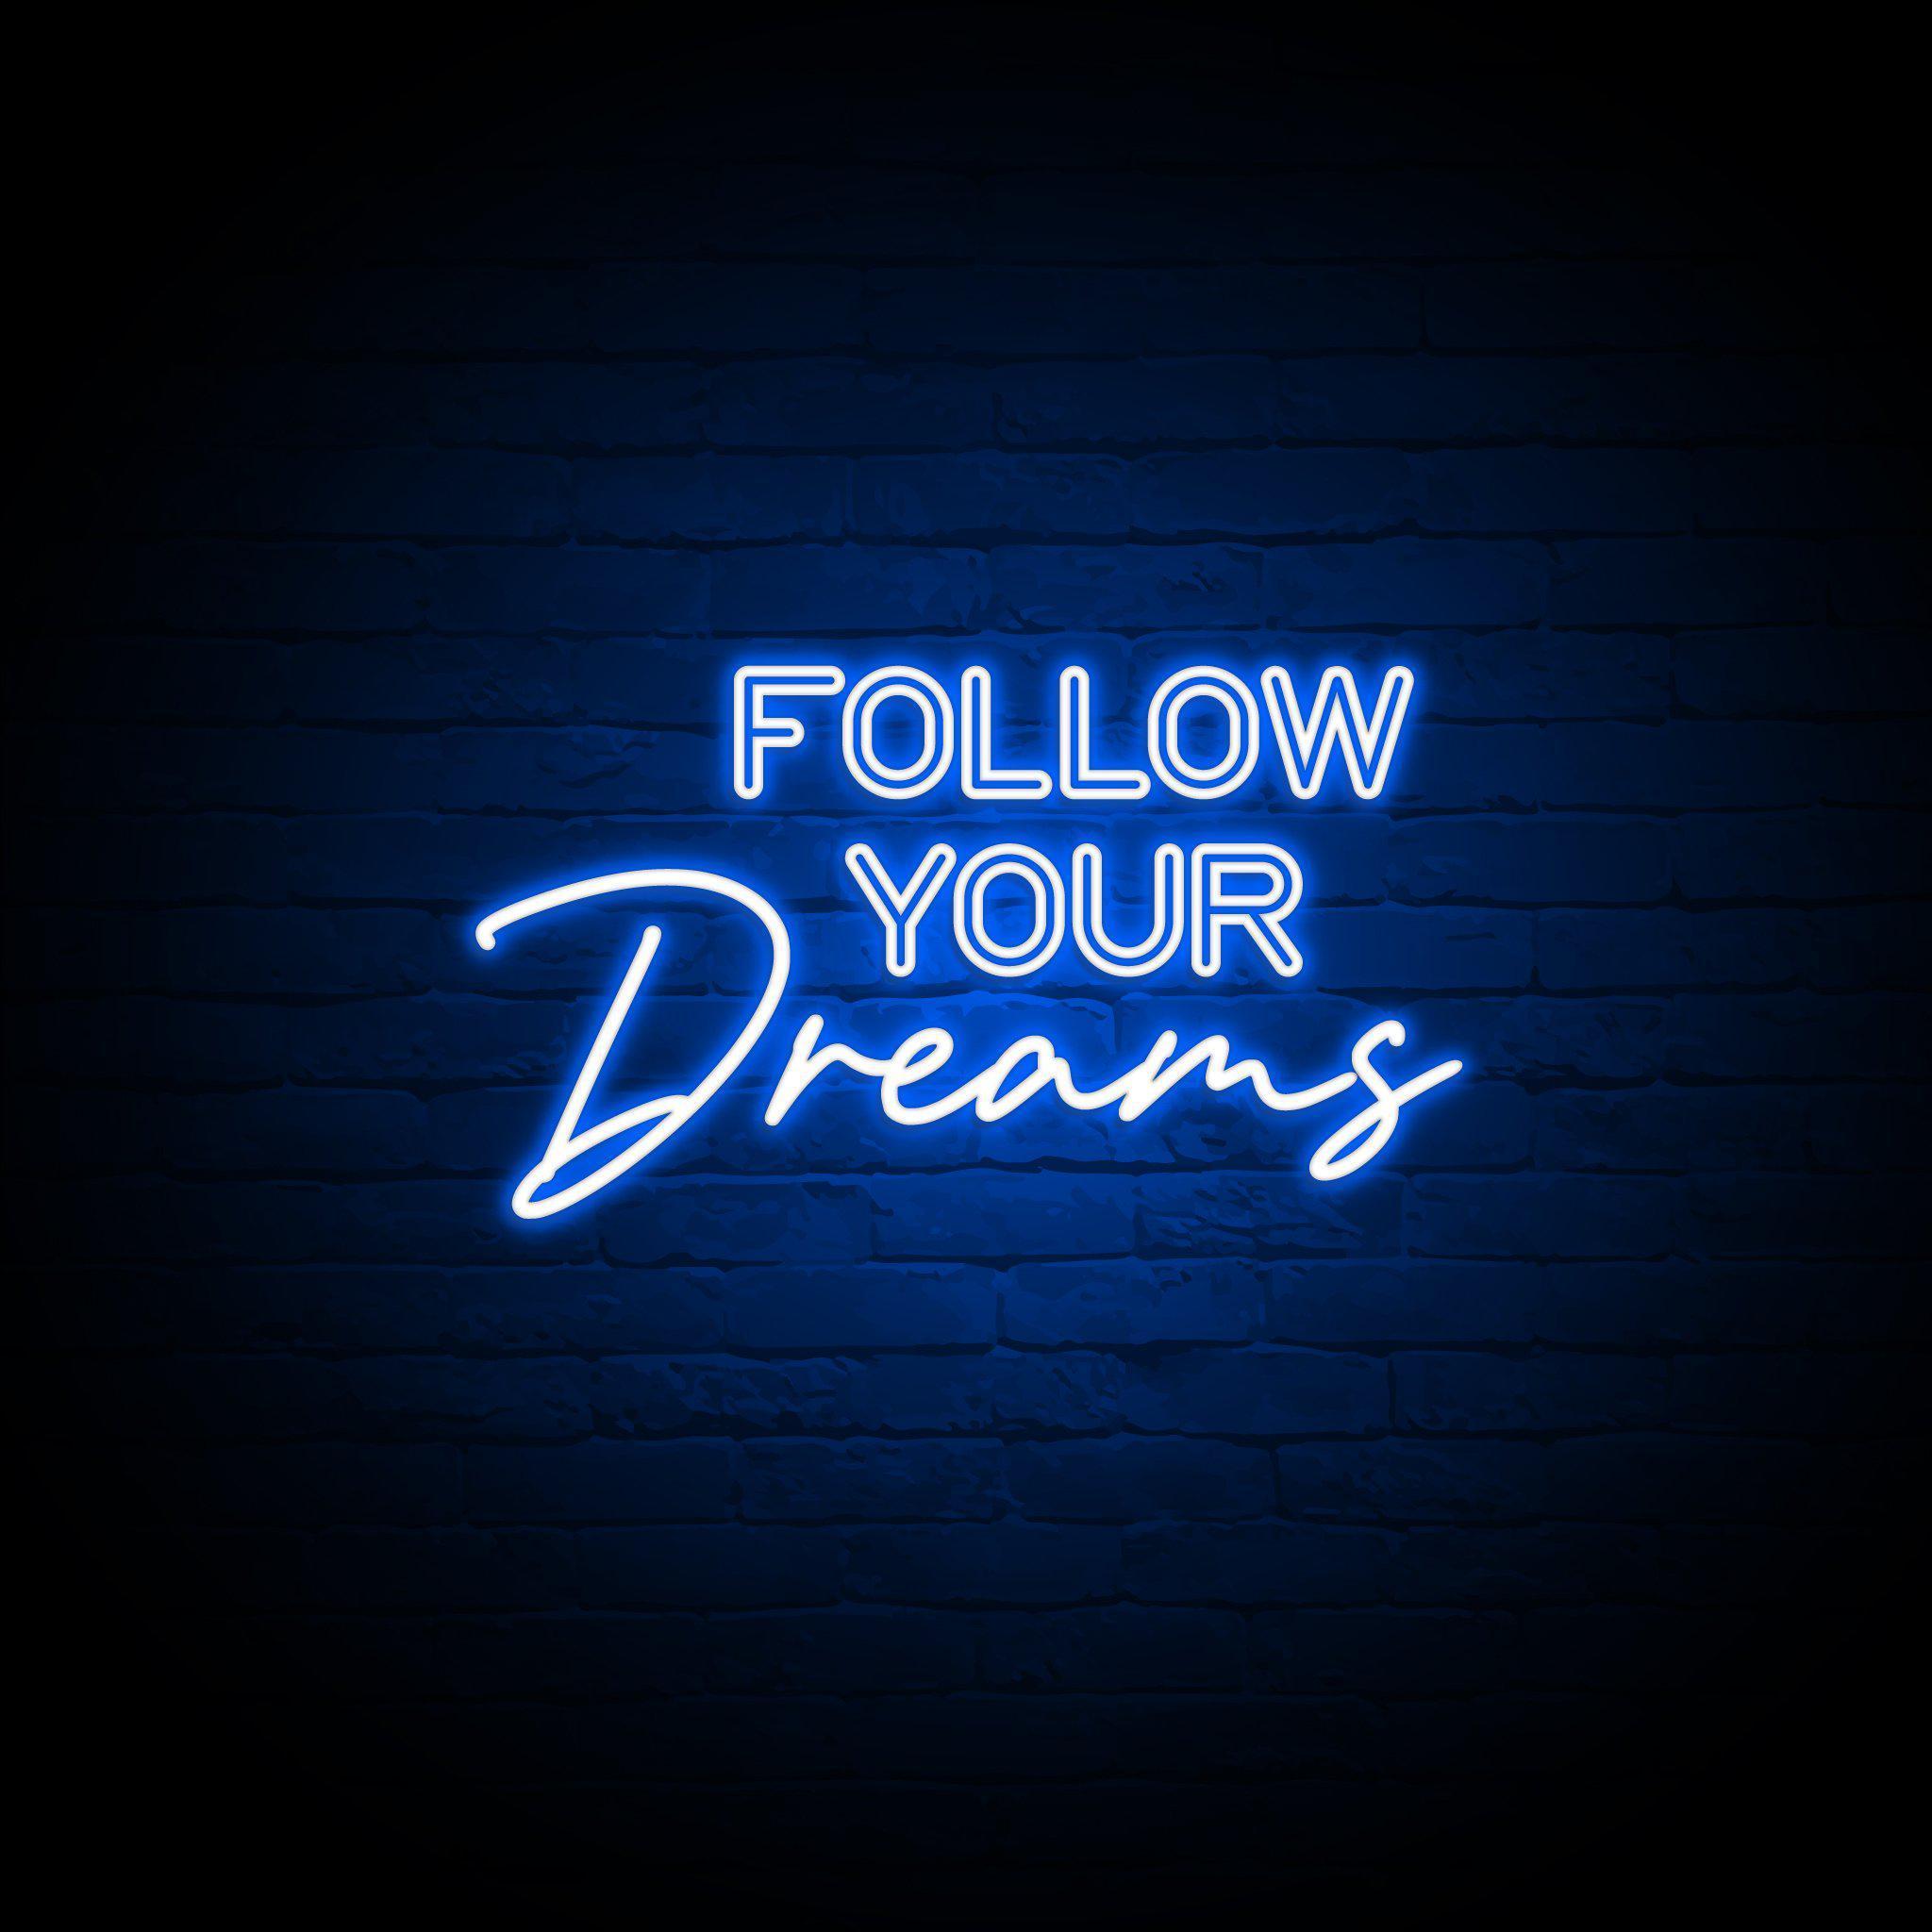 'FOLLOW YOUR DREAMS' NEON SIGN - NeonFerry